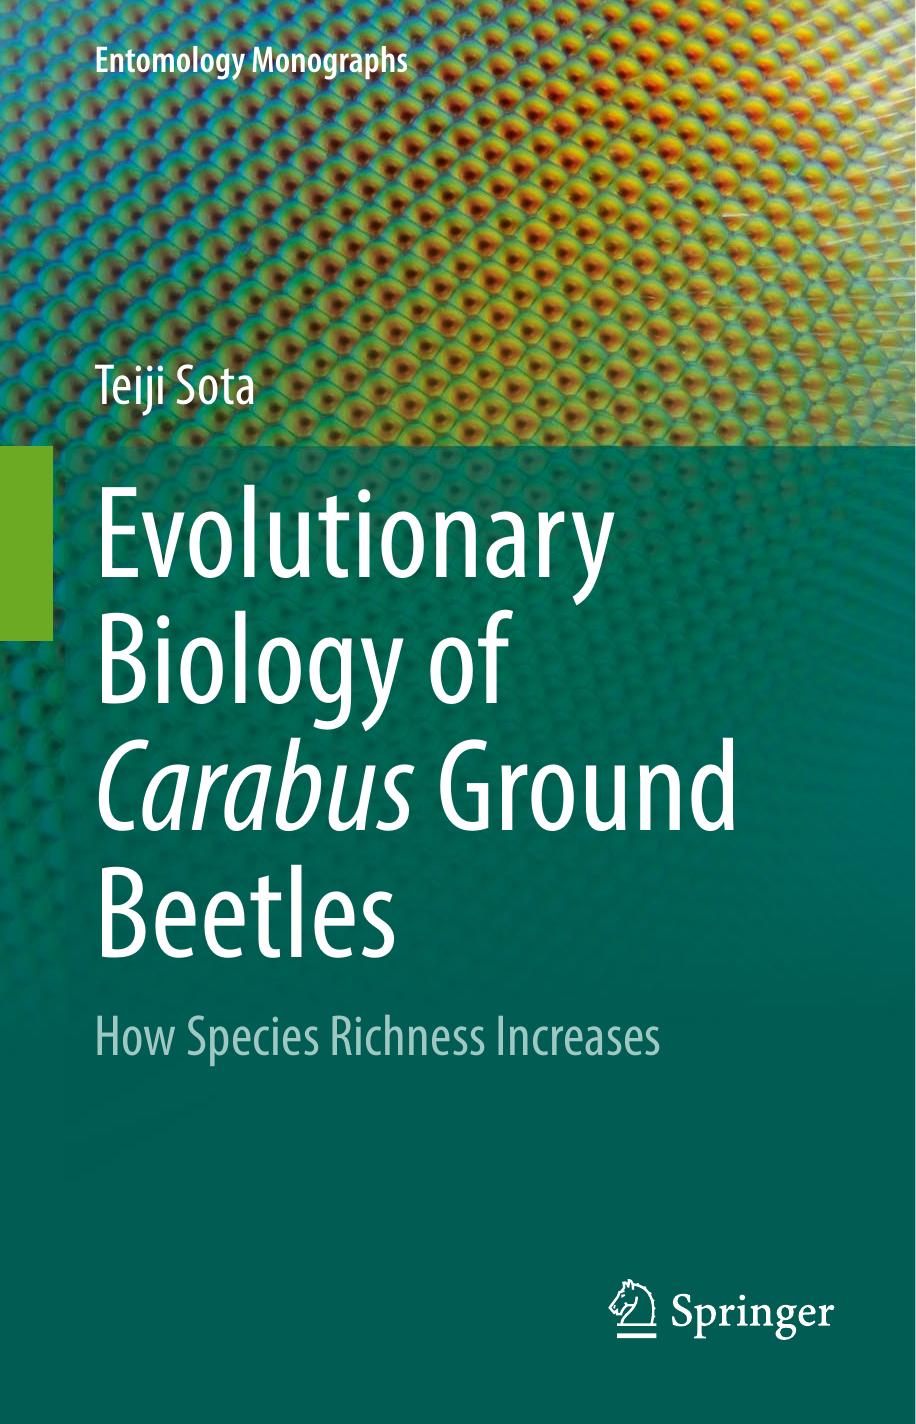 Evolutionary Biology of Carabus Ground Beetles  How Species Richness Increases  2021)